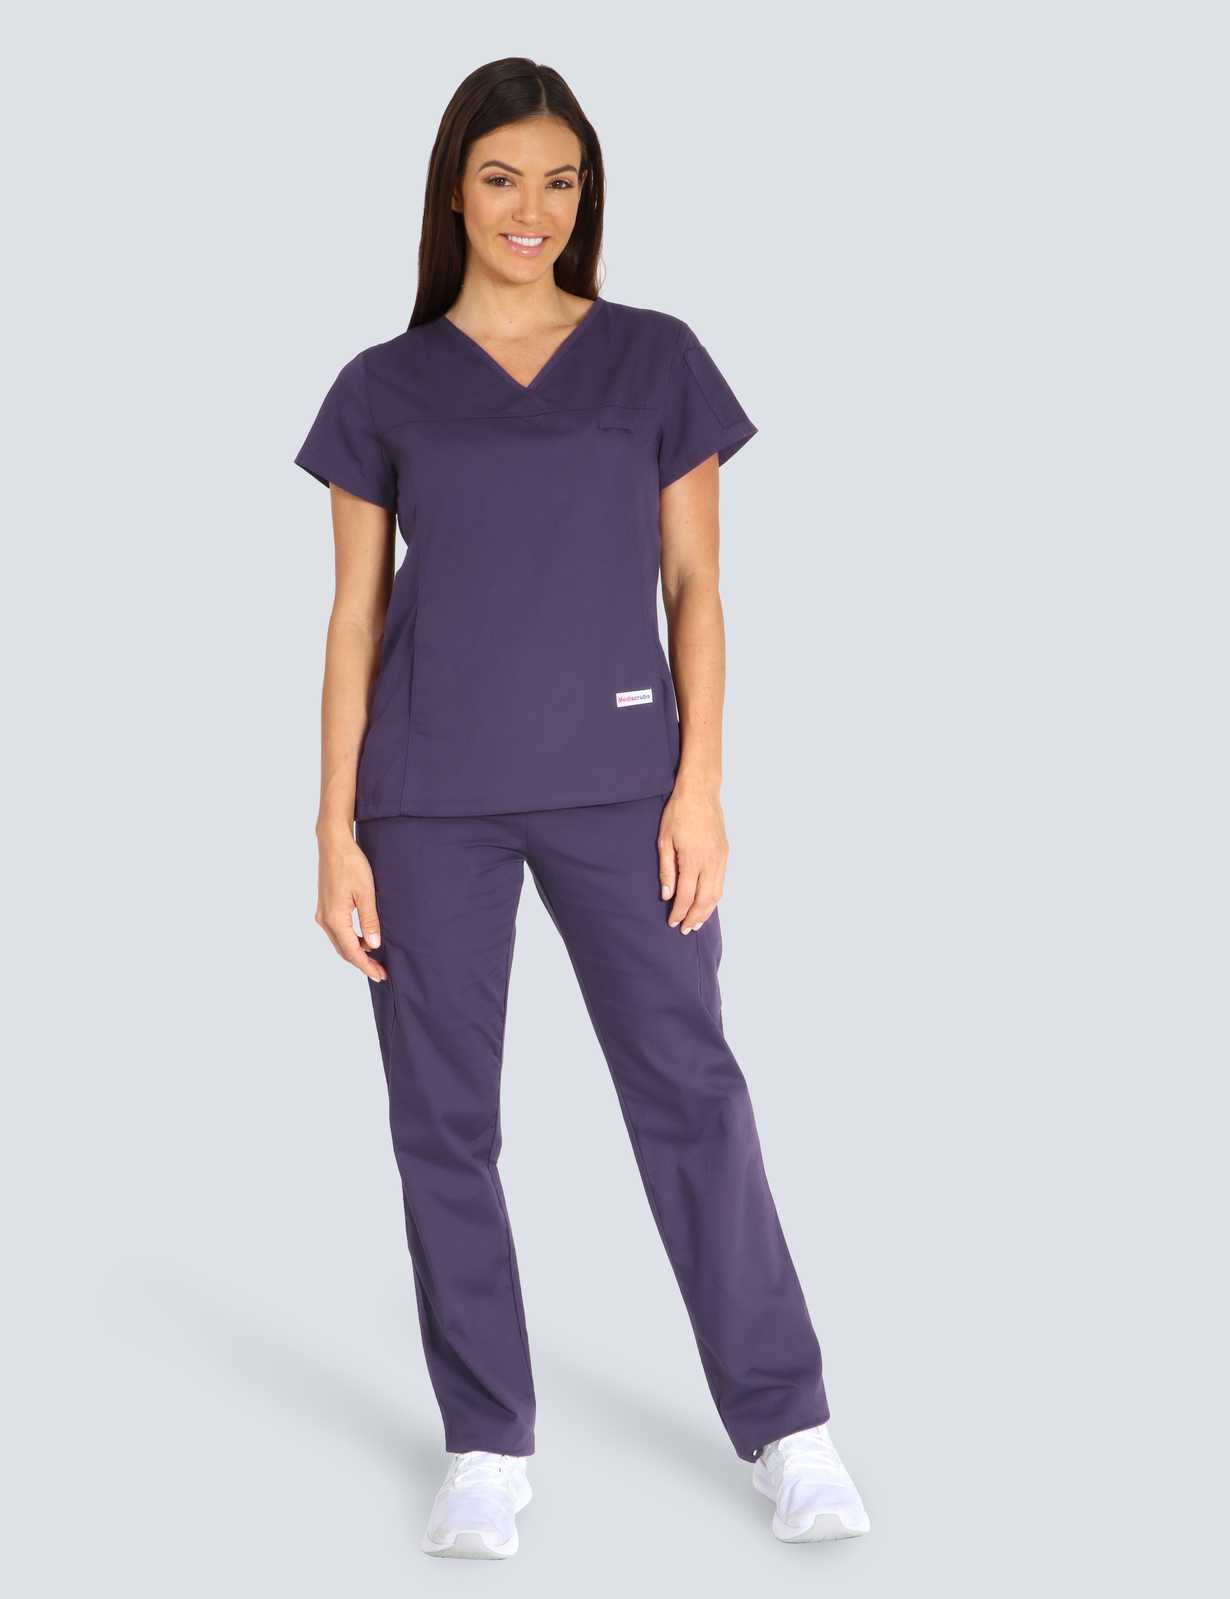 Toowoomba Hospital Pharmacist Uniform Set Bundle (Women's Fit Solid Top and Cargo Pants in Aubergine incl Logo)